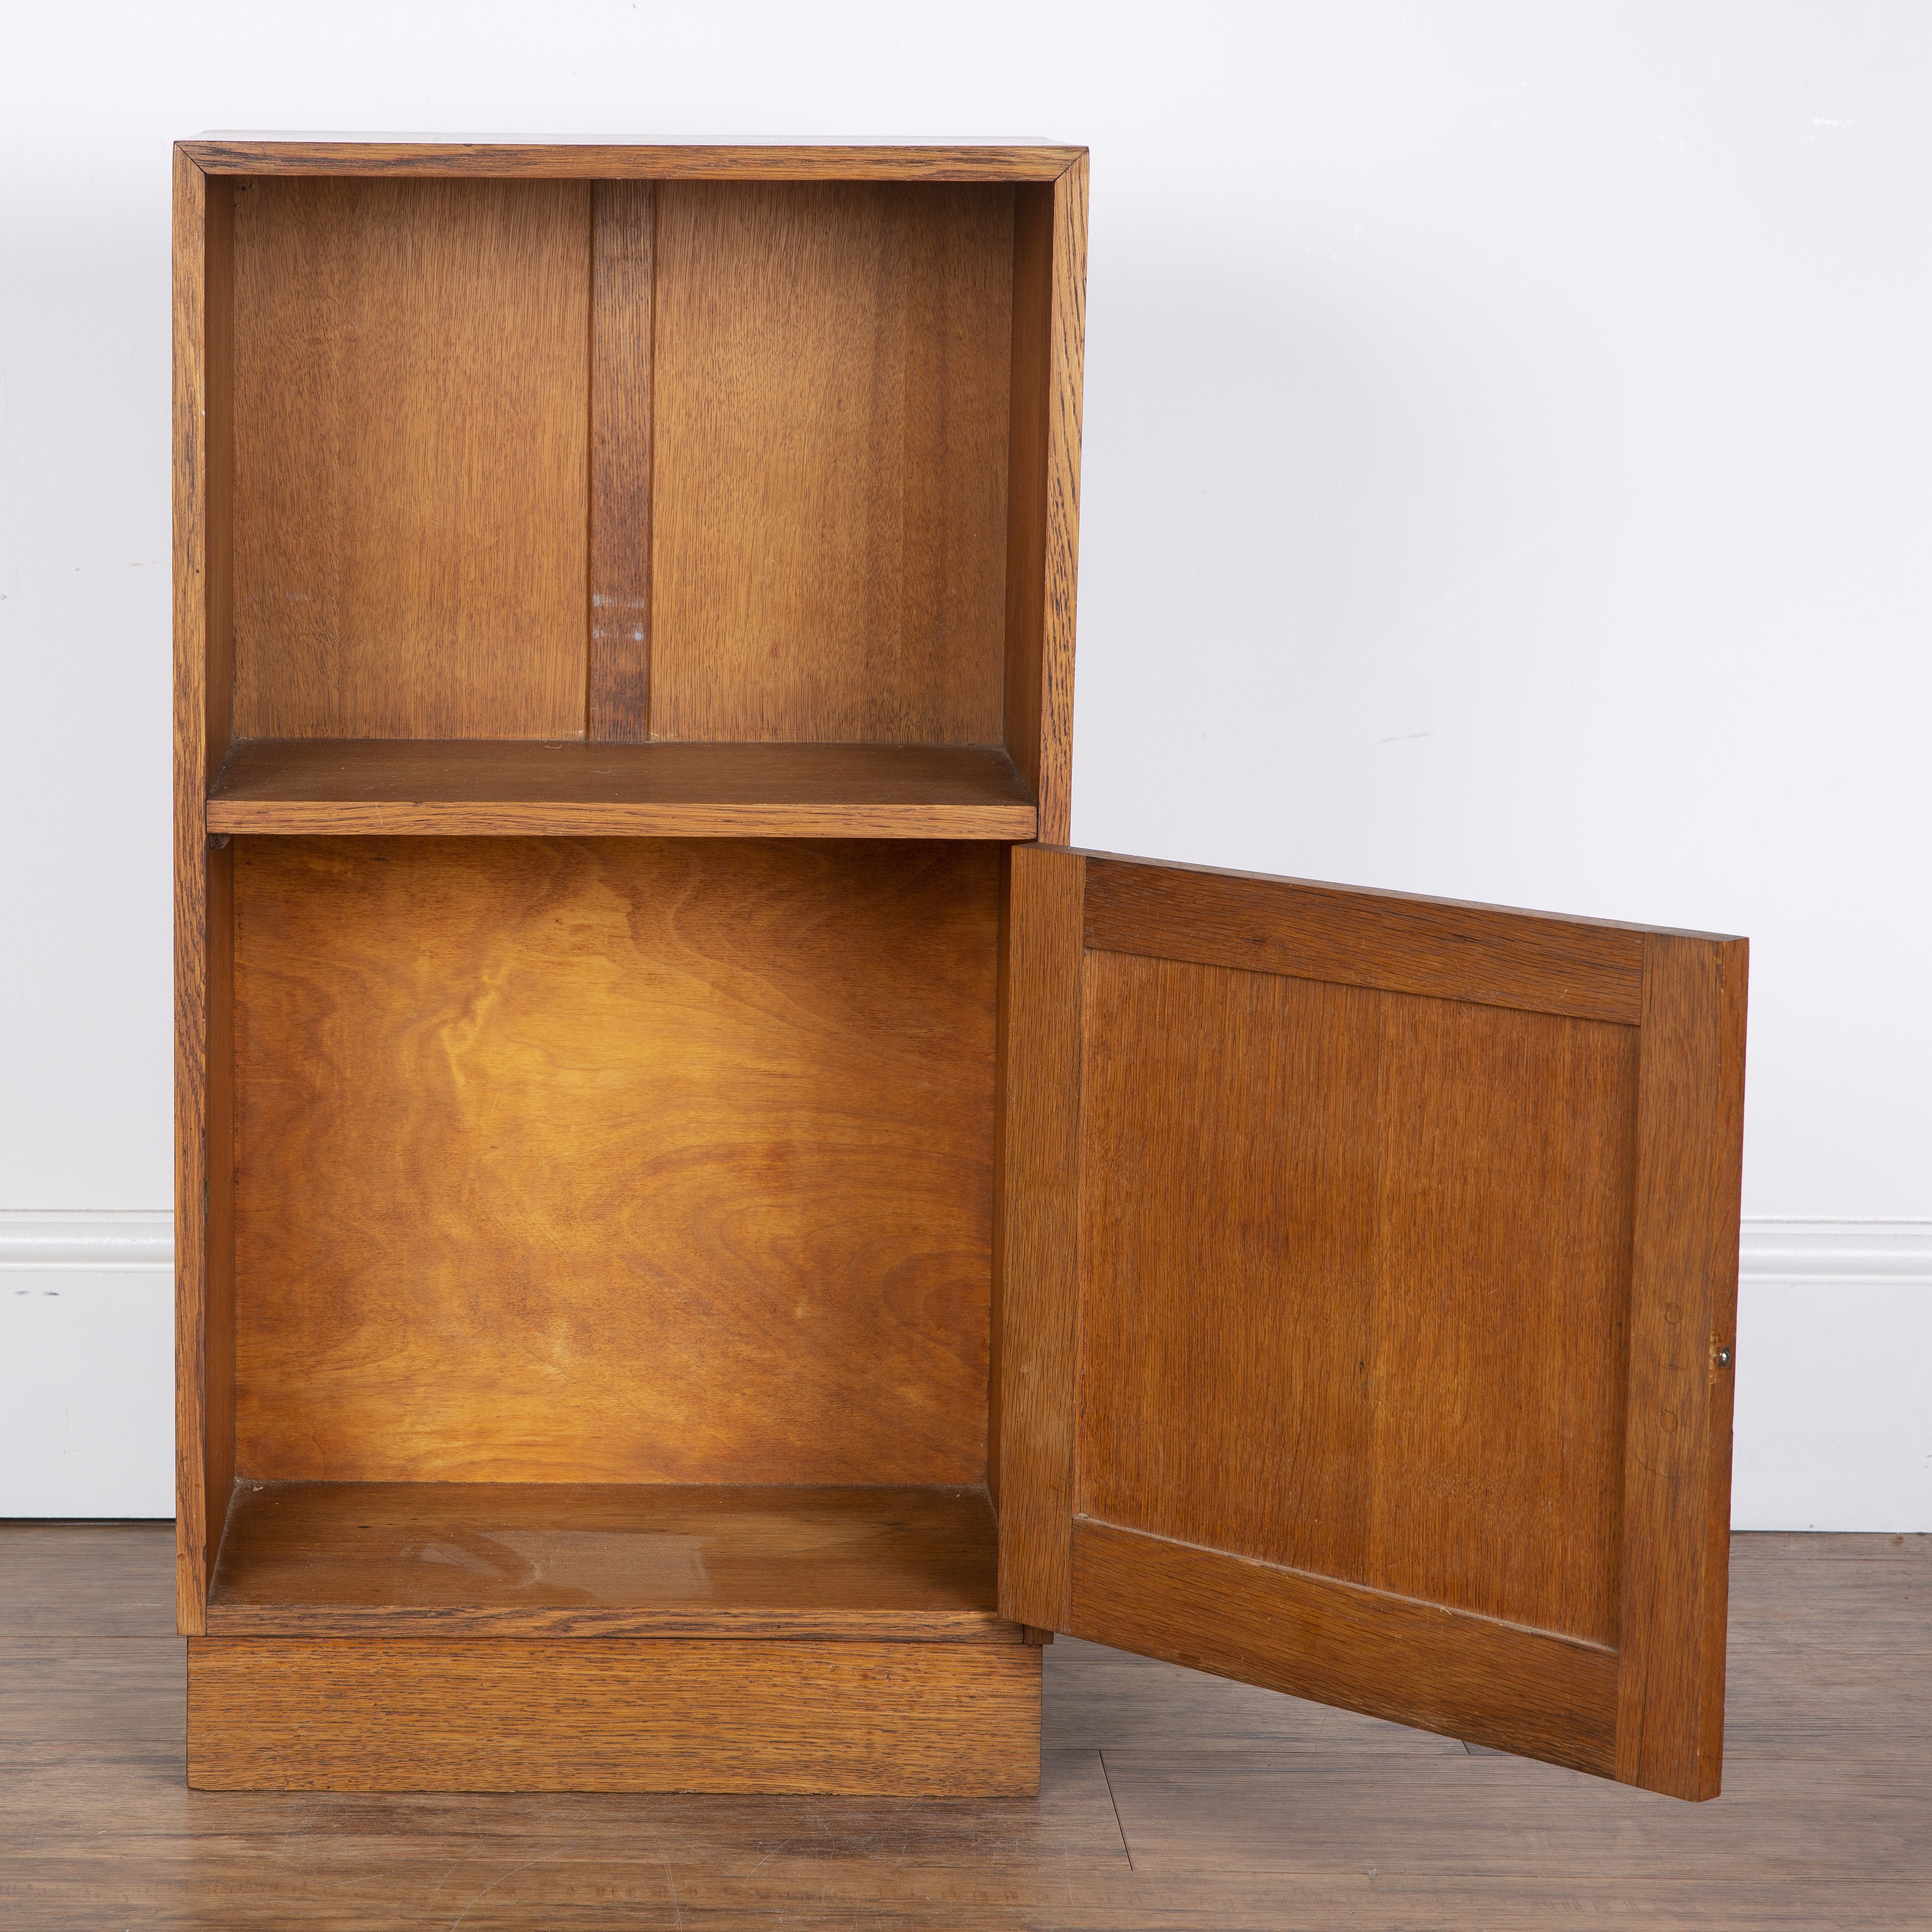 Attributed to Heals oak, small cupboard or bedside table, with open shelf above a fielded panel - Image 2 of 5